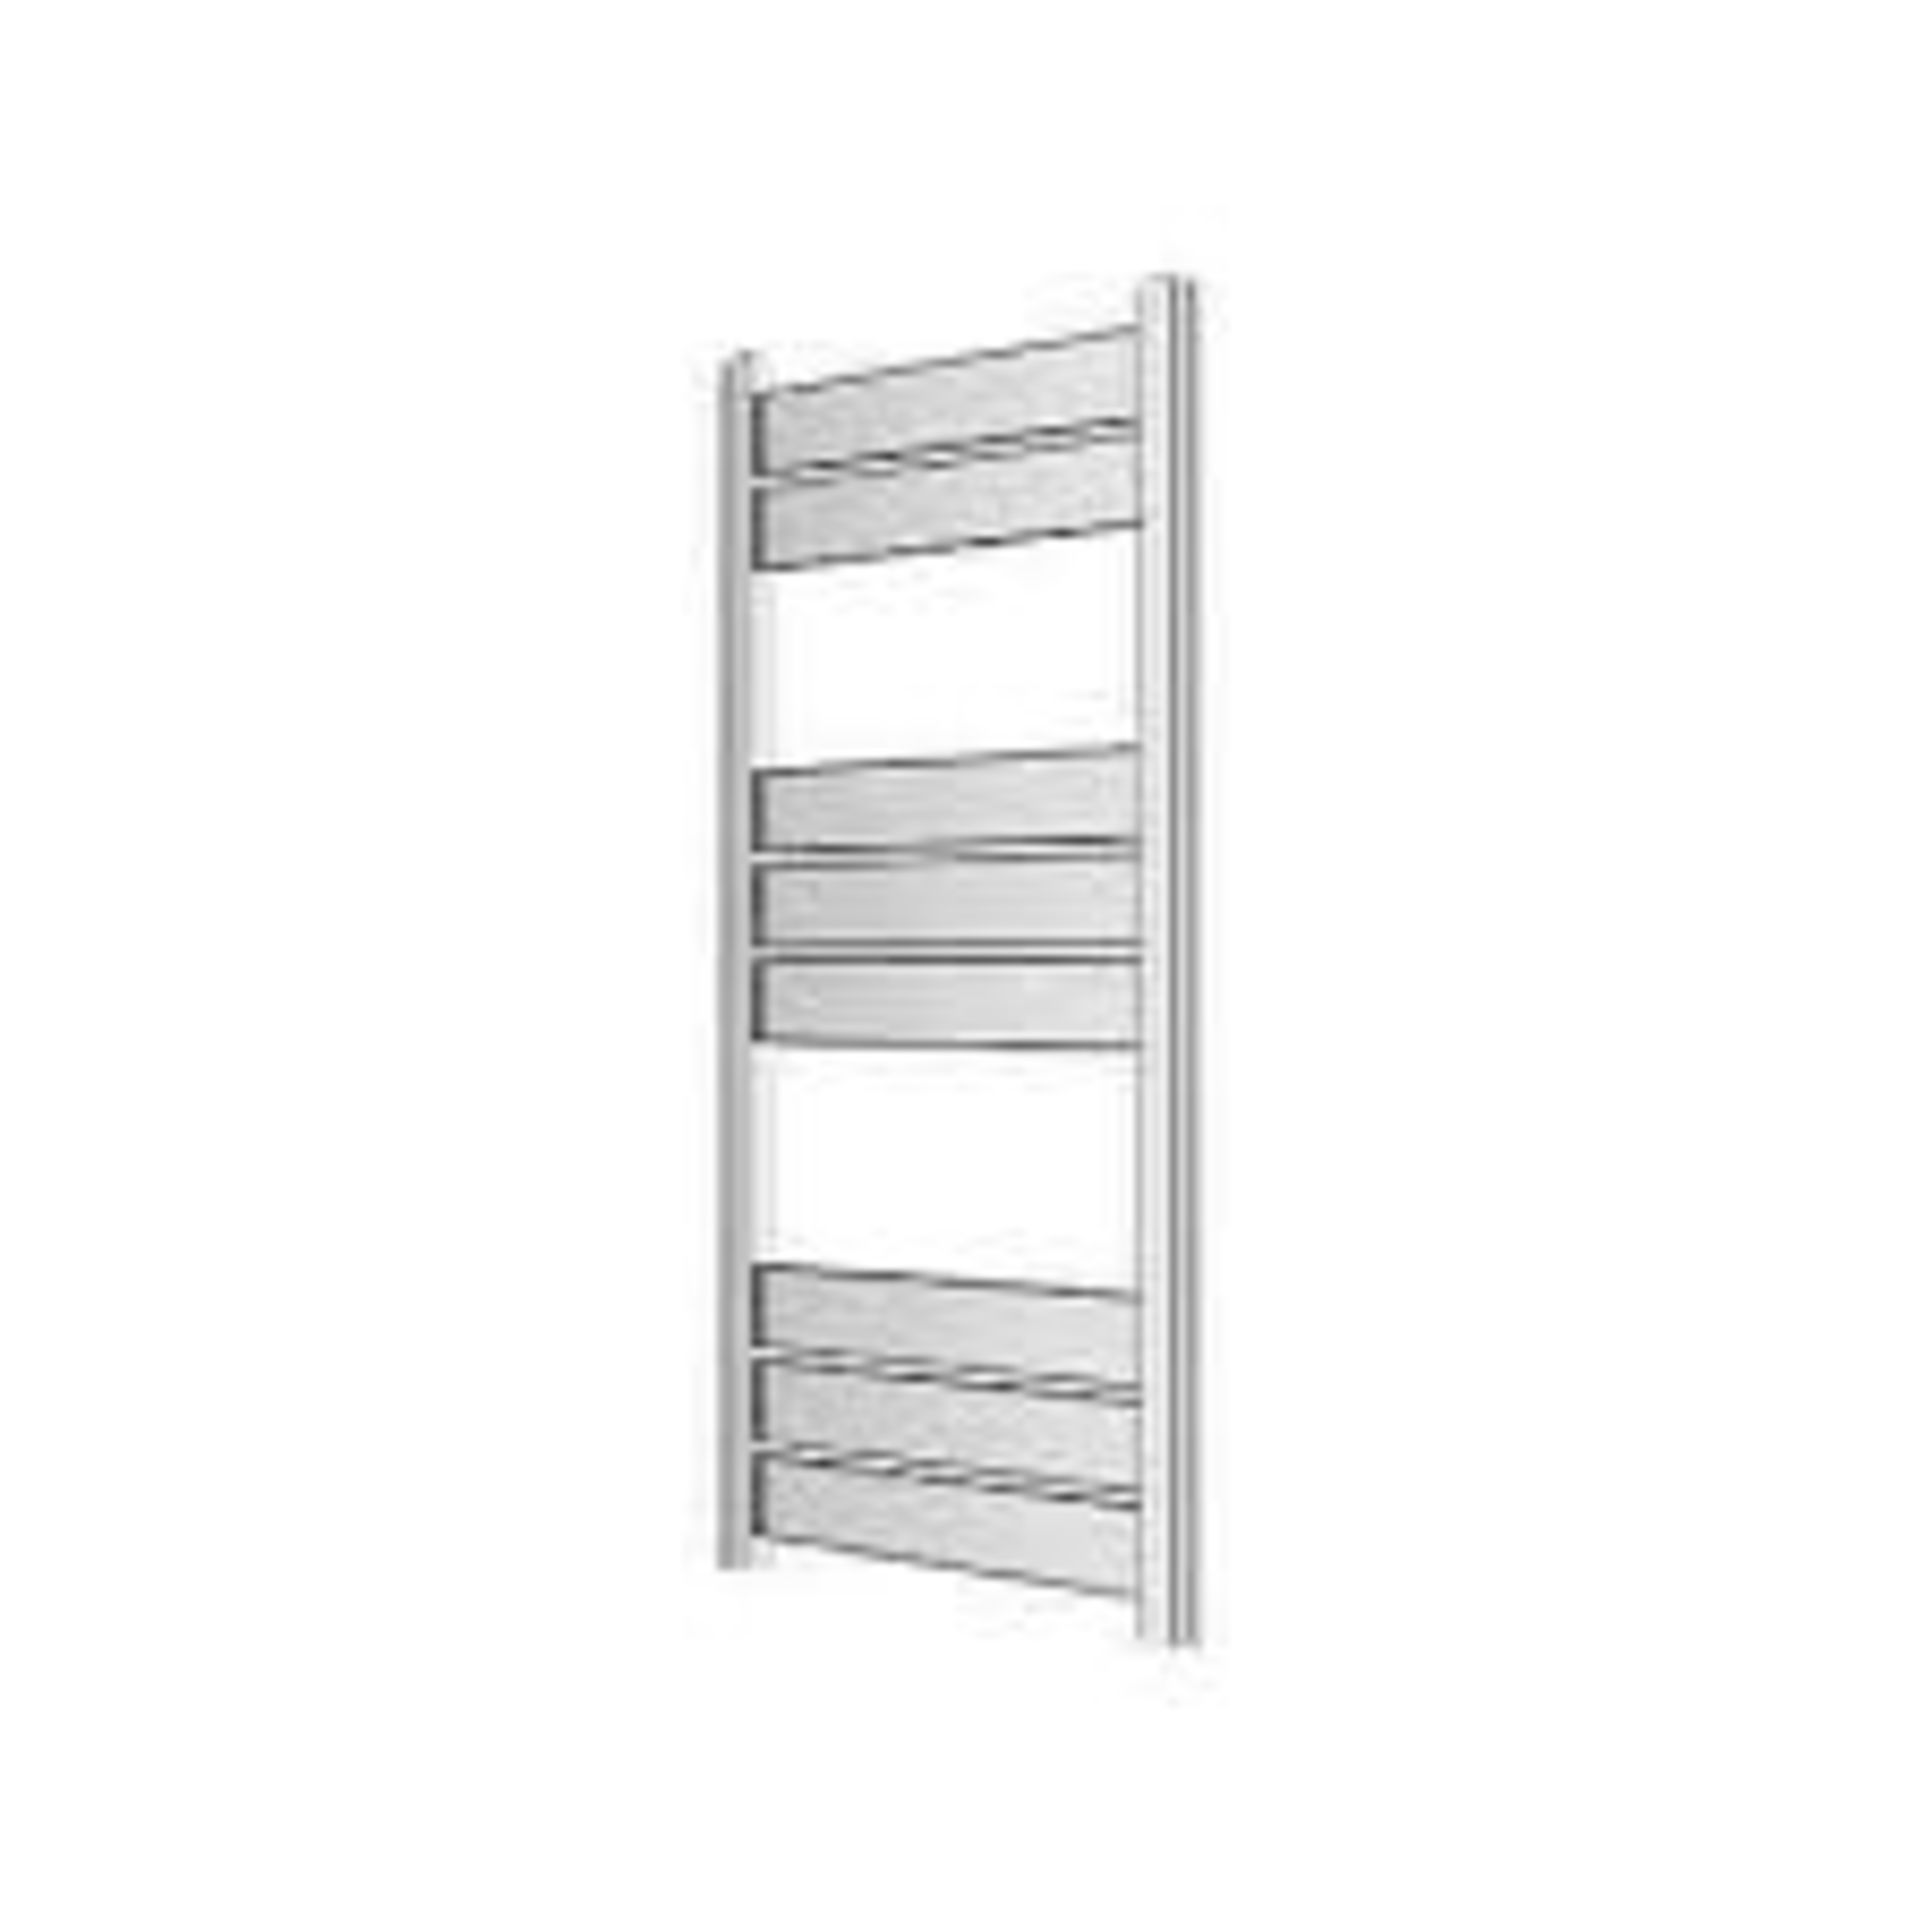 GoodHome Ellesmere Vertical Flat Towel radiator (W)450mm x 700mm. R14.12. . Highly efficient, it